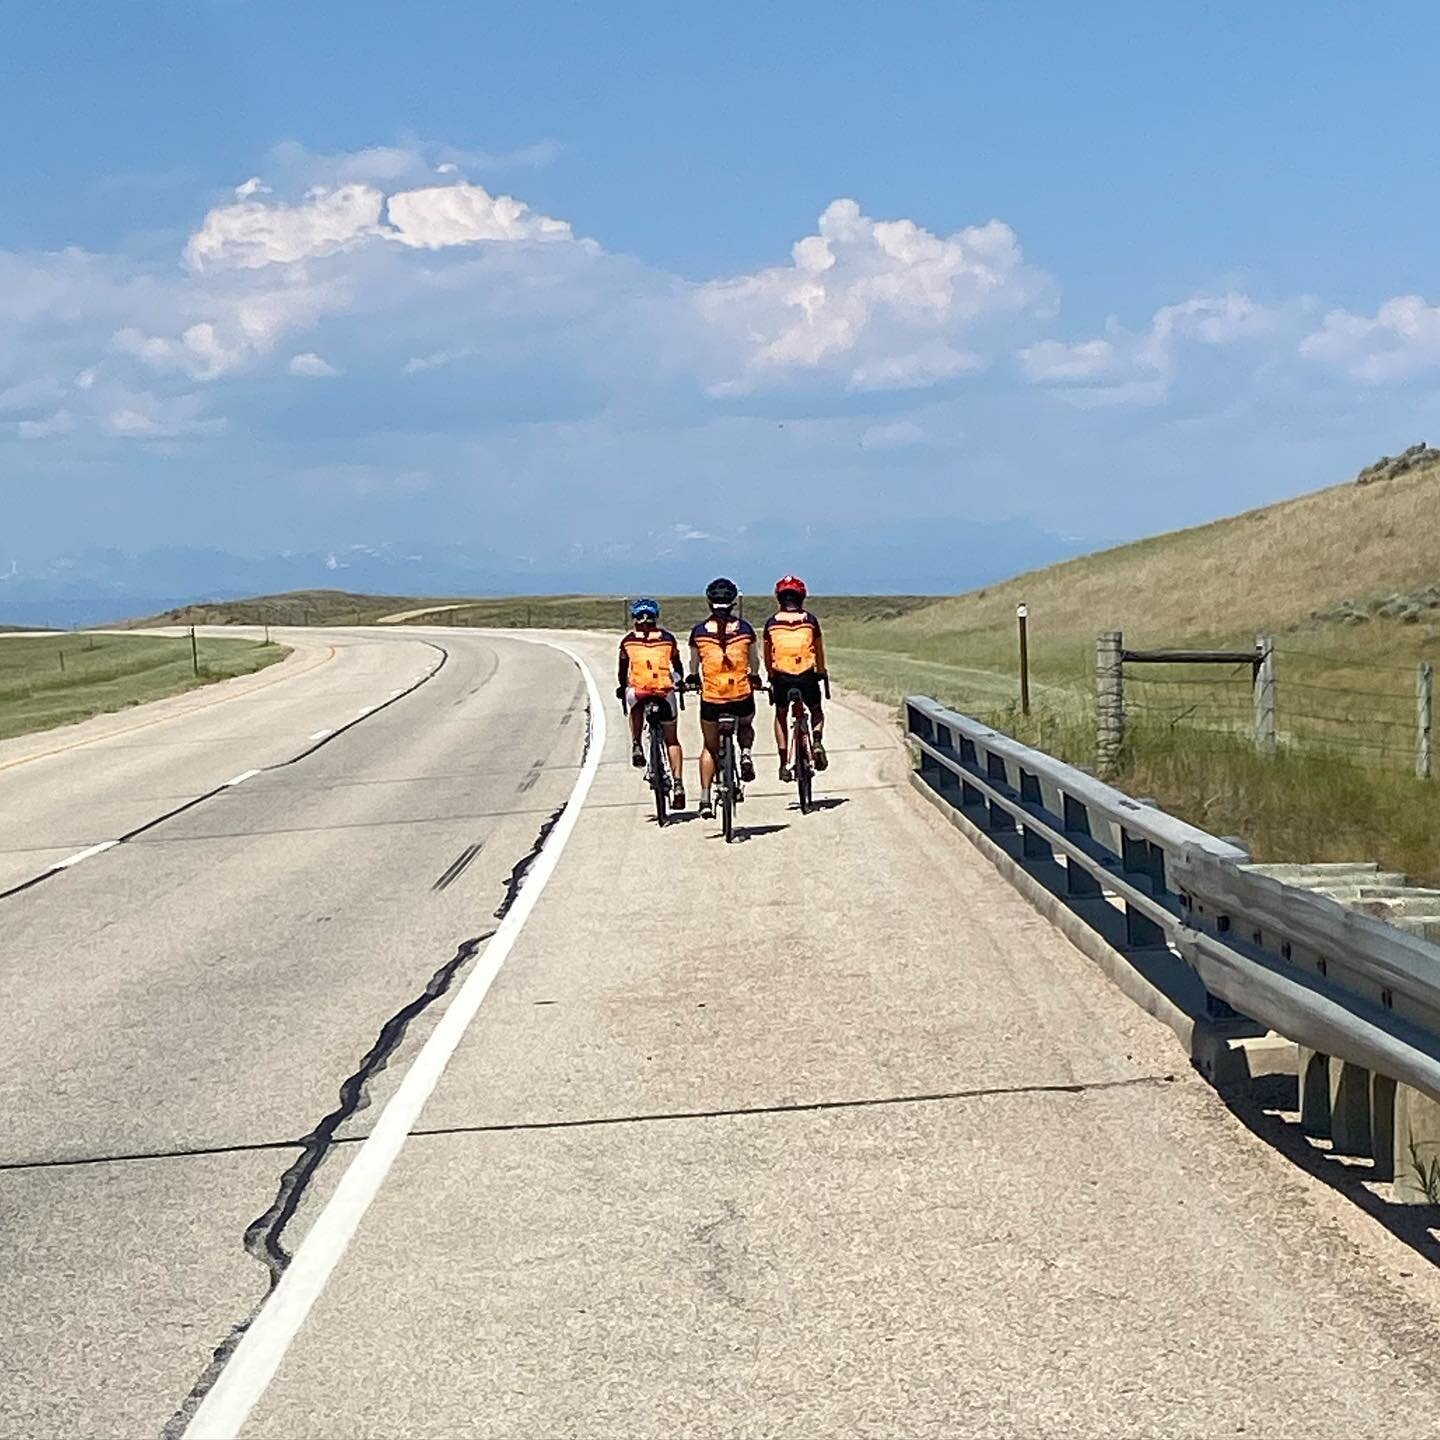 Day 43: We made it to the base of the Bighorn mountains and now we&rsquo;re prepping for our big climb tomorrow! Throughout the day we biked and danced our way through some strong headwinds from Gillette to Buffalo, WY hitting 71.1 miles 💨🚴🏼!
**Fo